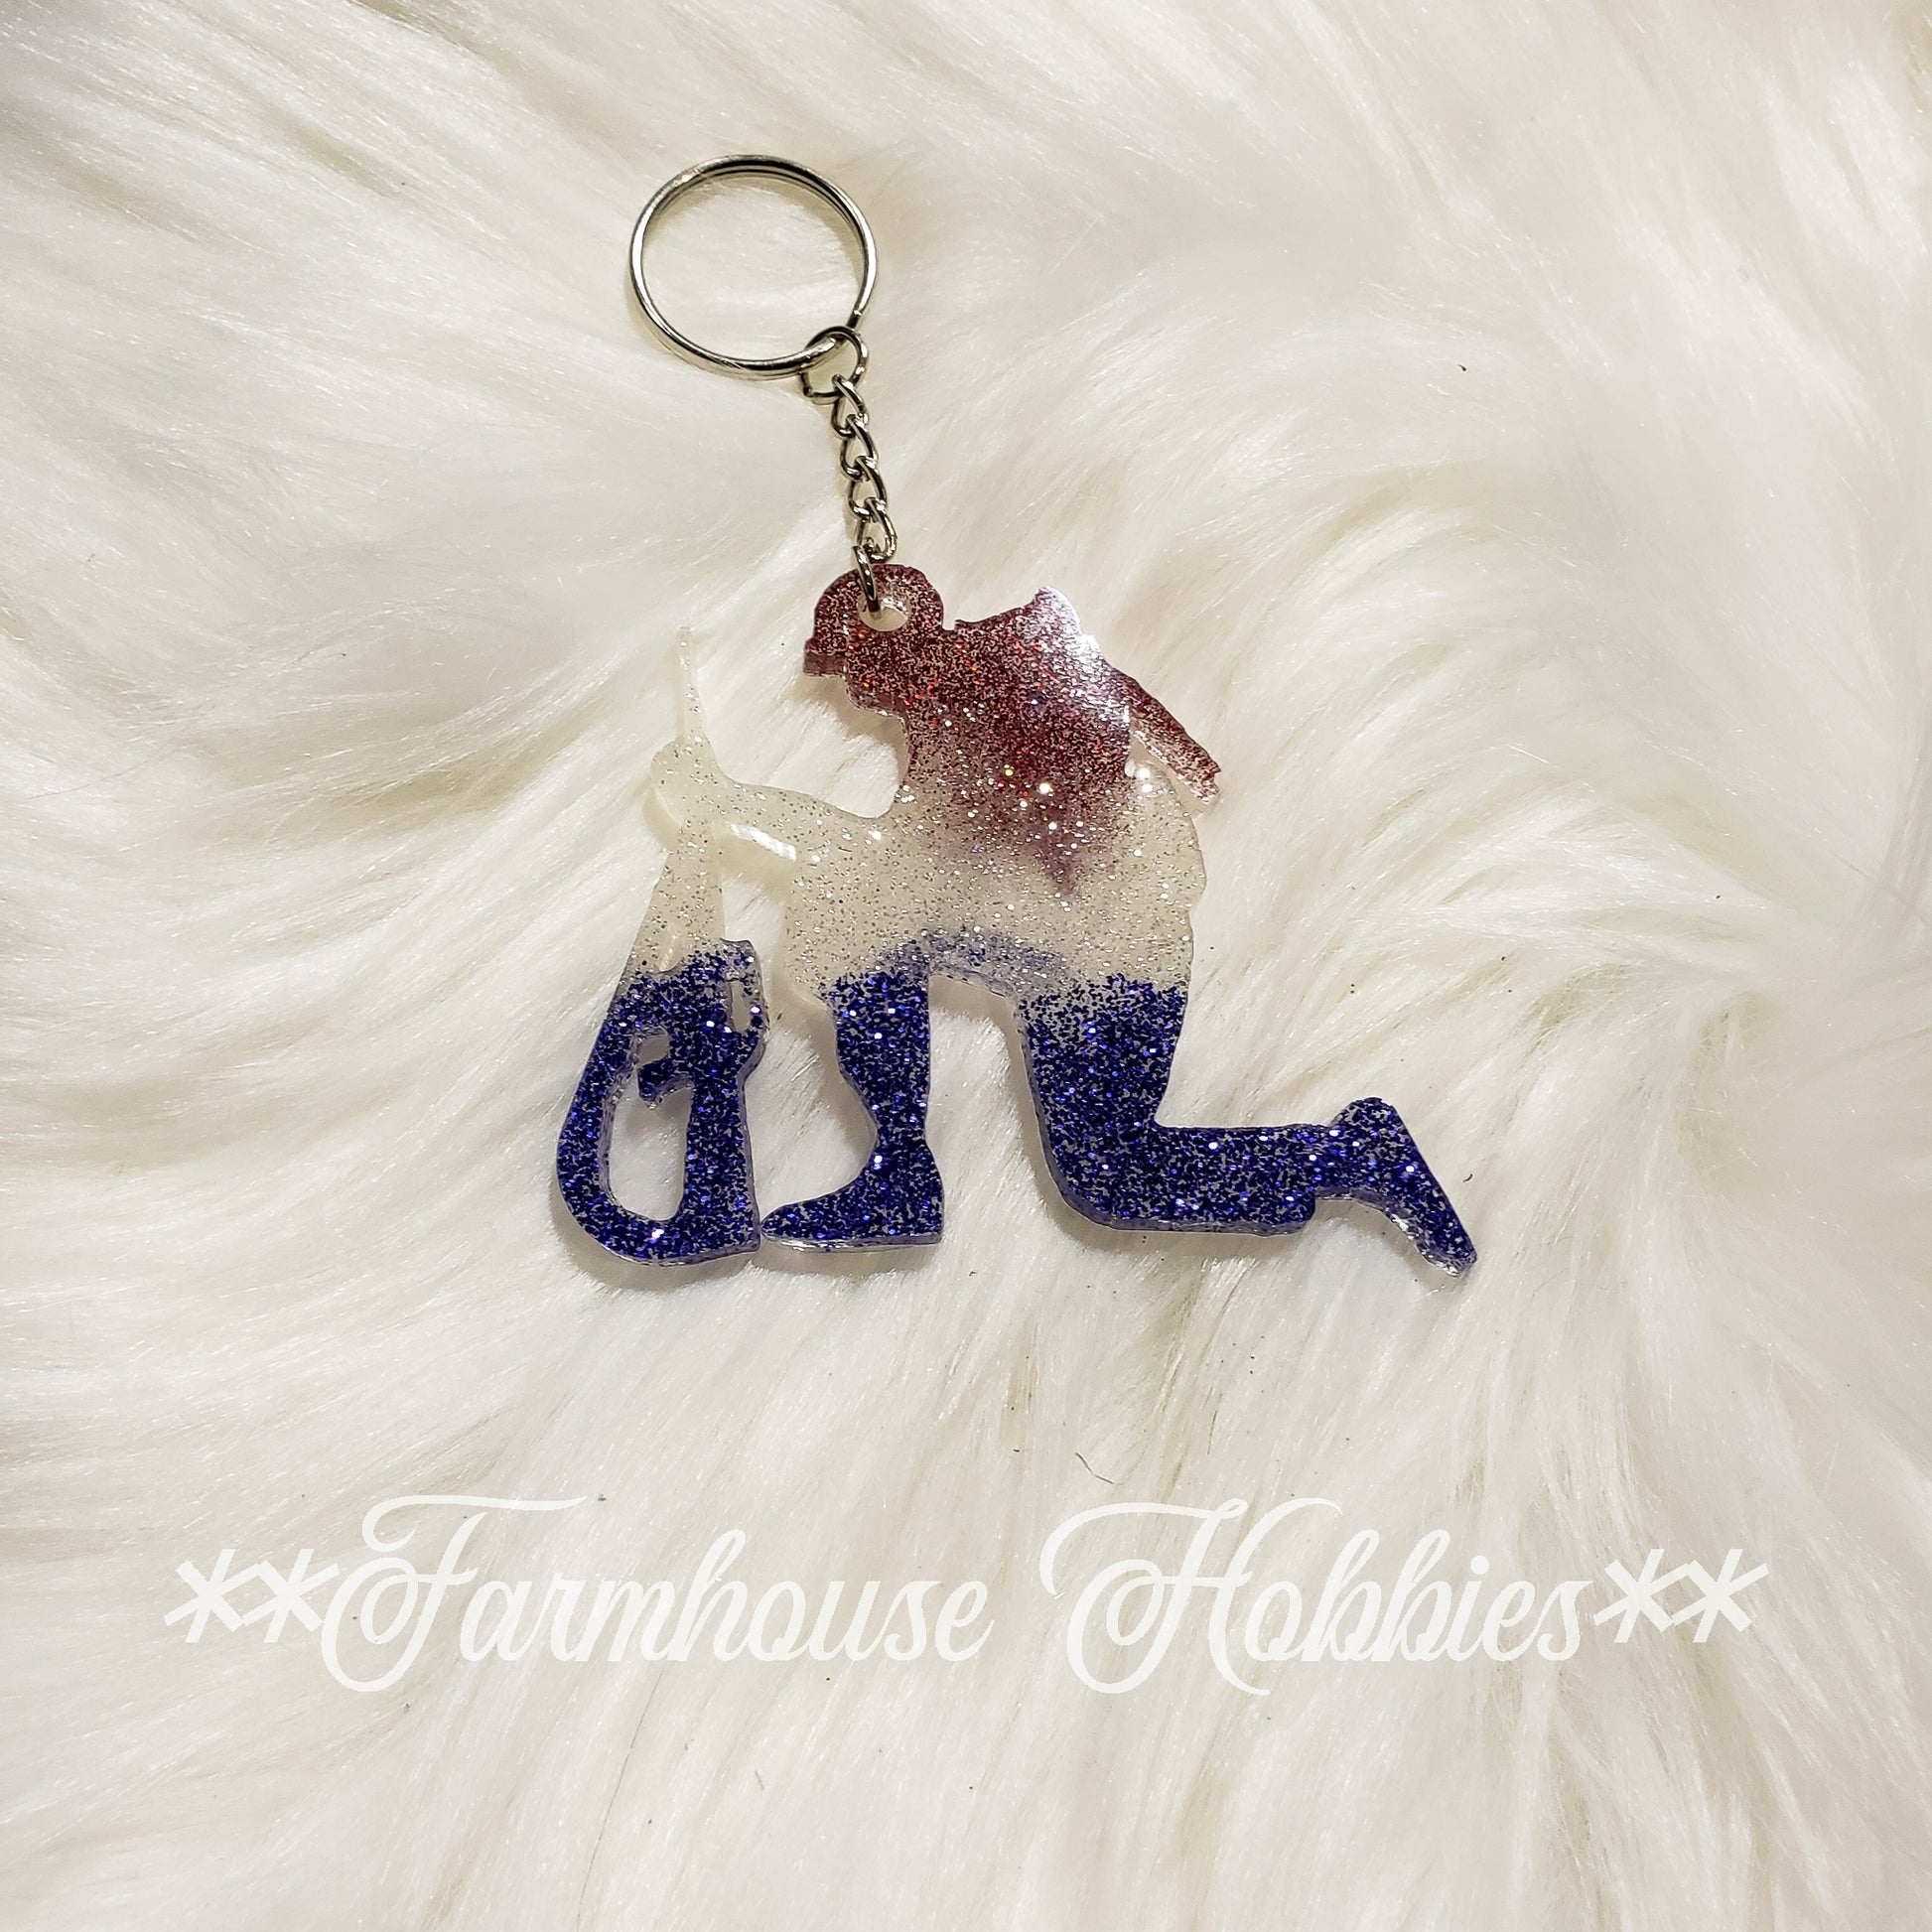 Large Keychain - Red White & Blue Praying Soldier Home Decor/Accessories Farmhouse Hobbies   